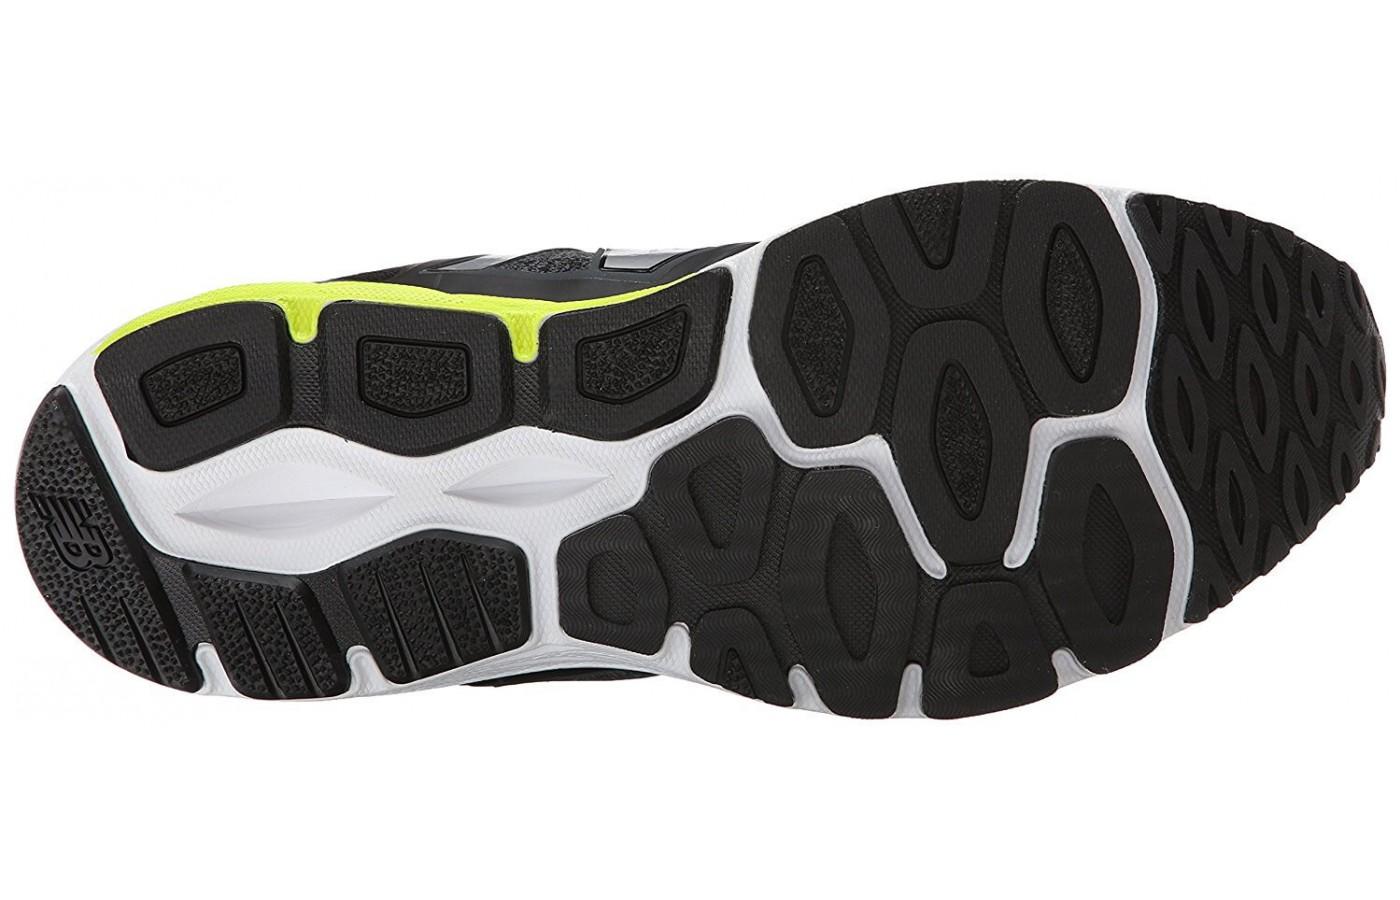 The larger tread gives the New Balance 770 v5 better traction and grip.